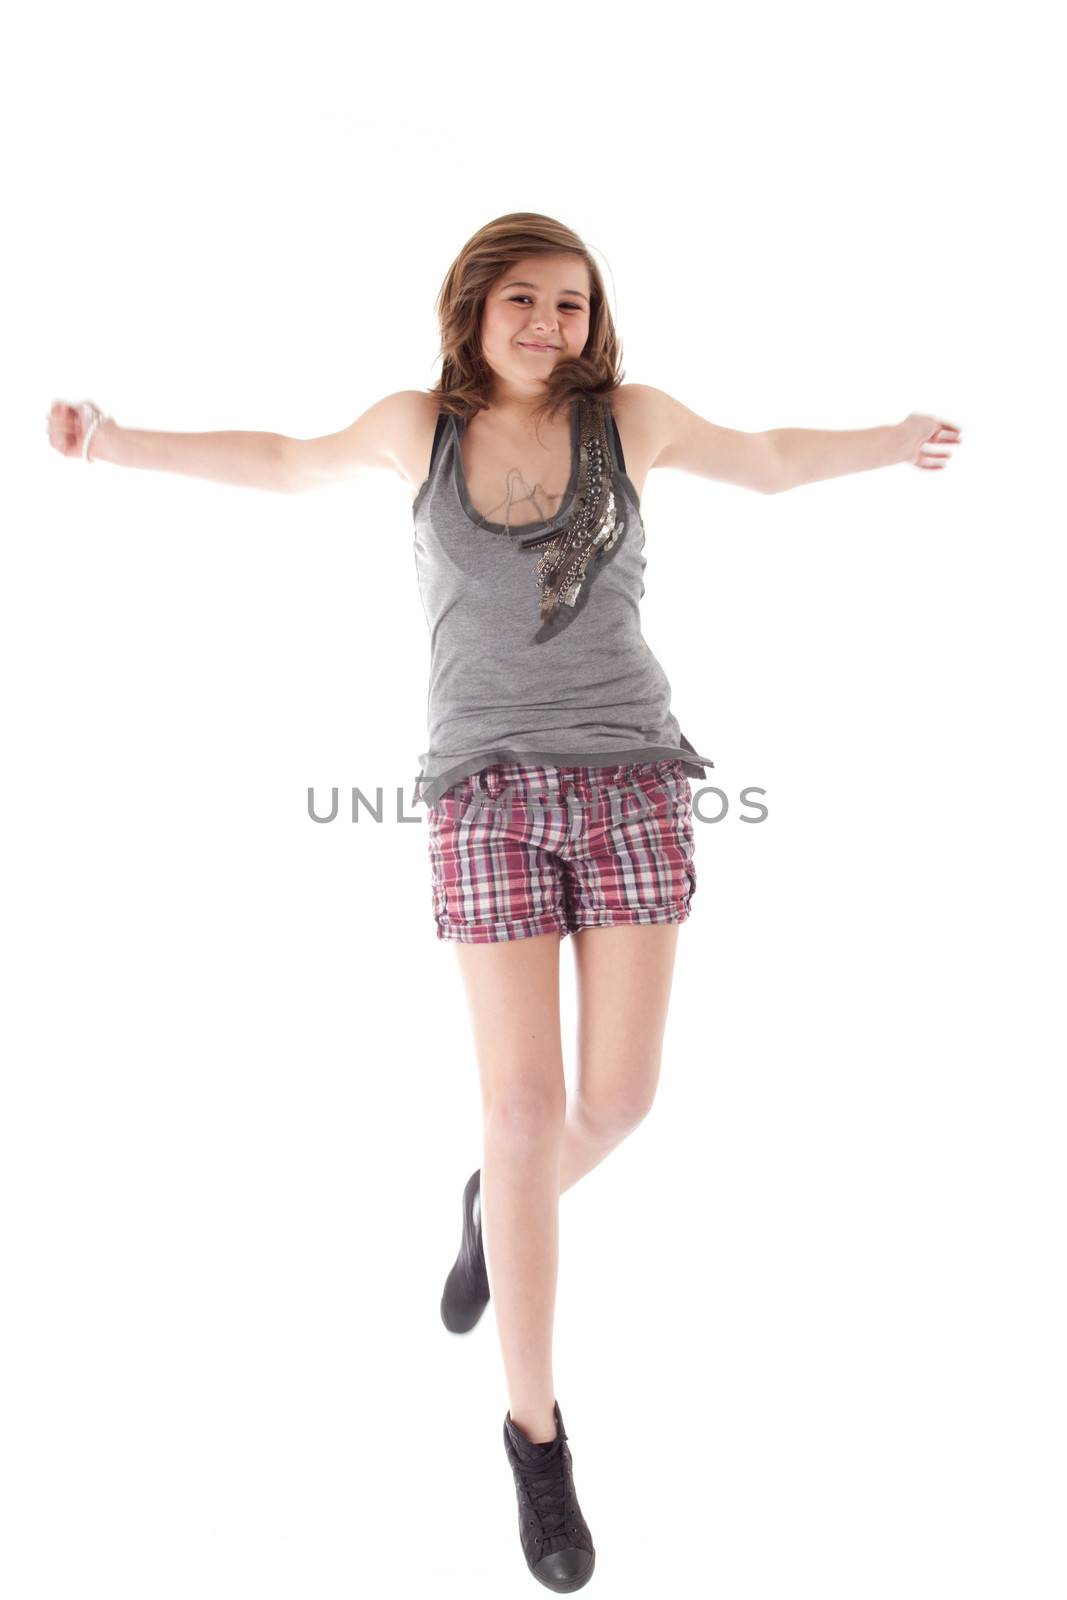 Jumping teen by DNFStyle